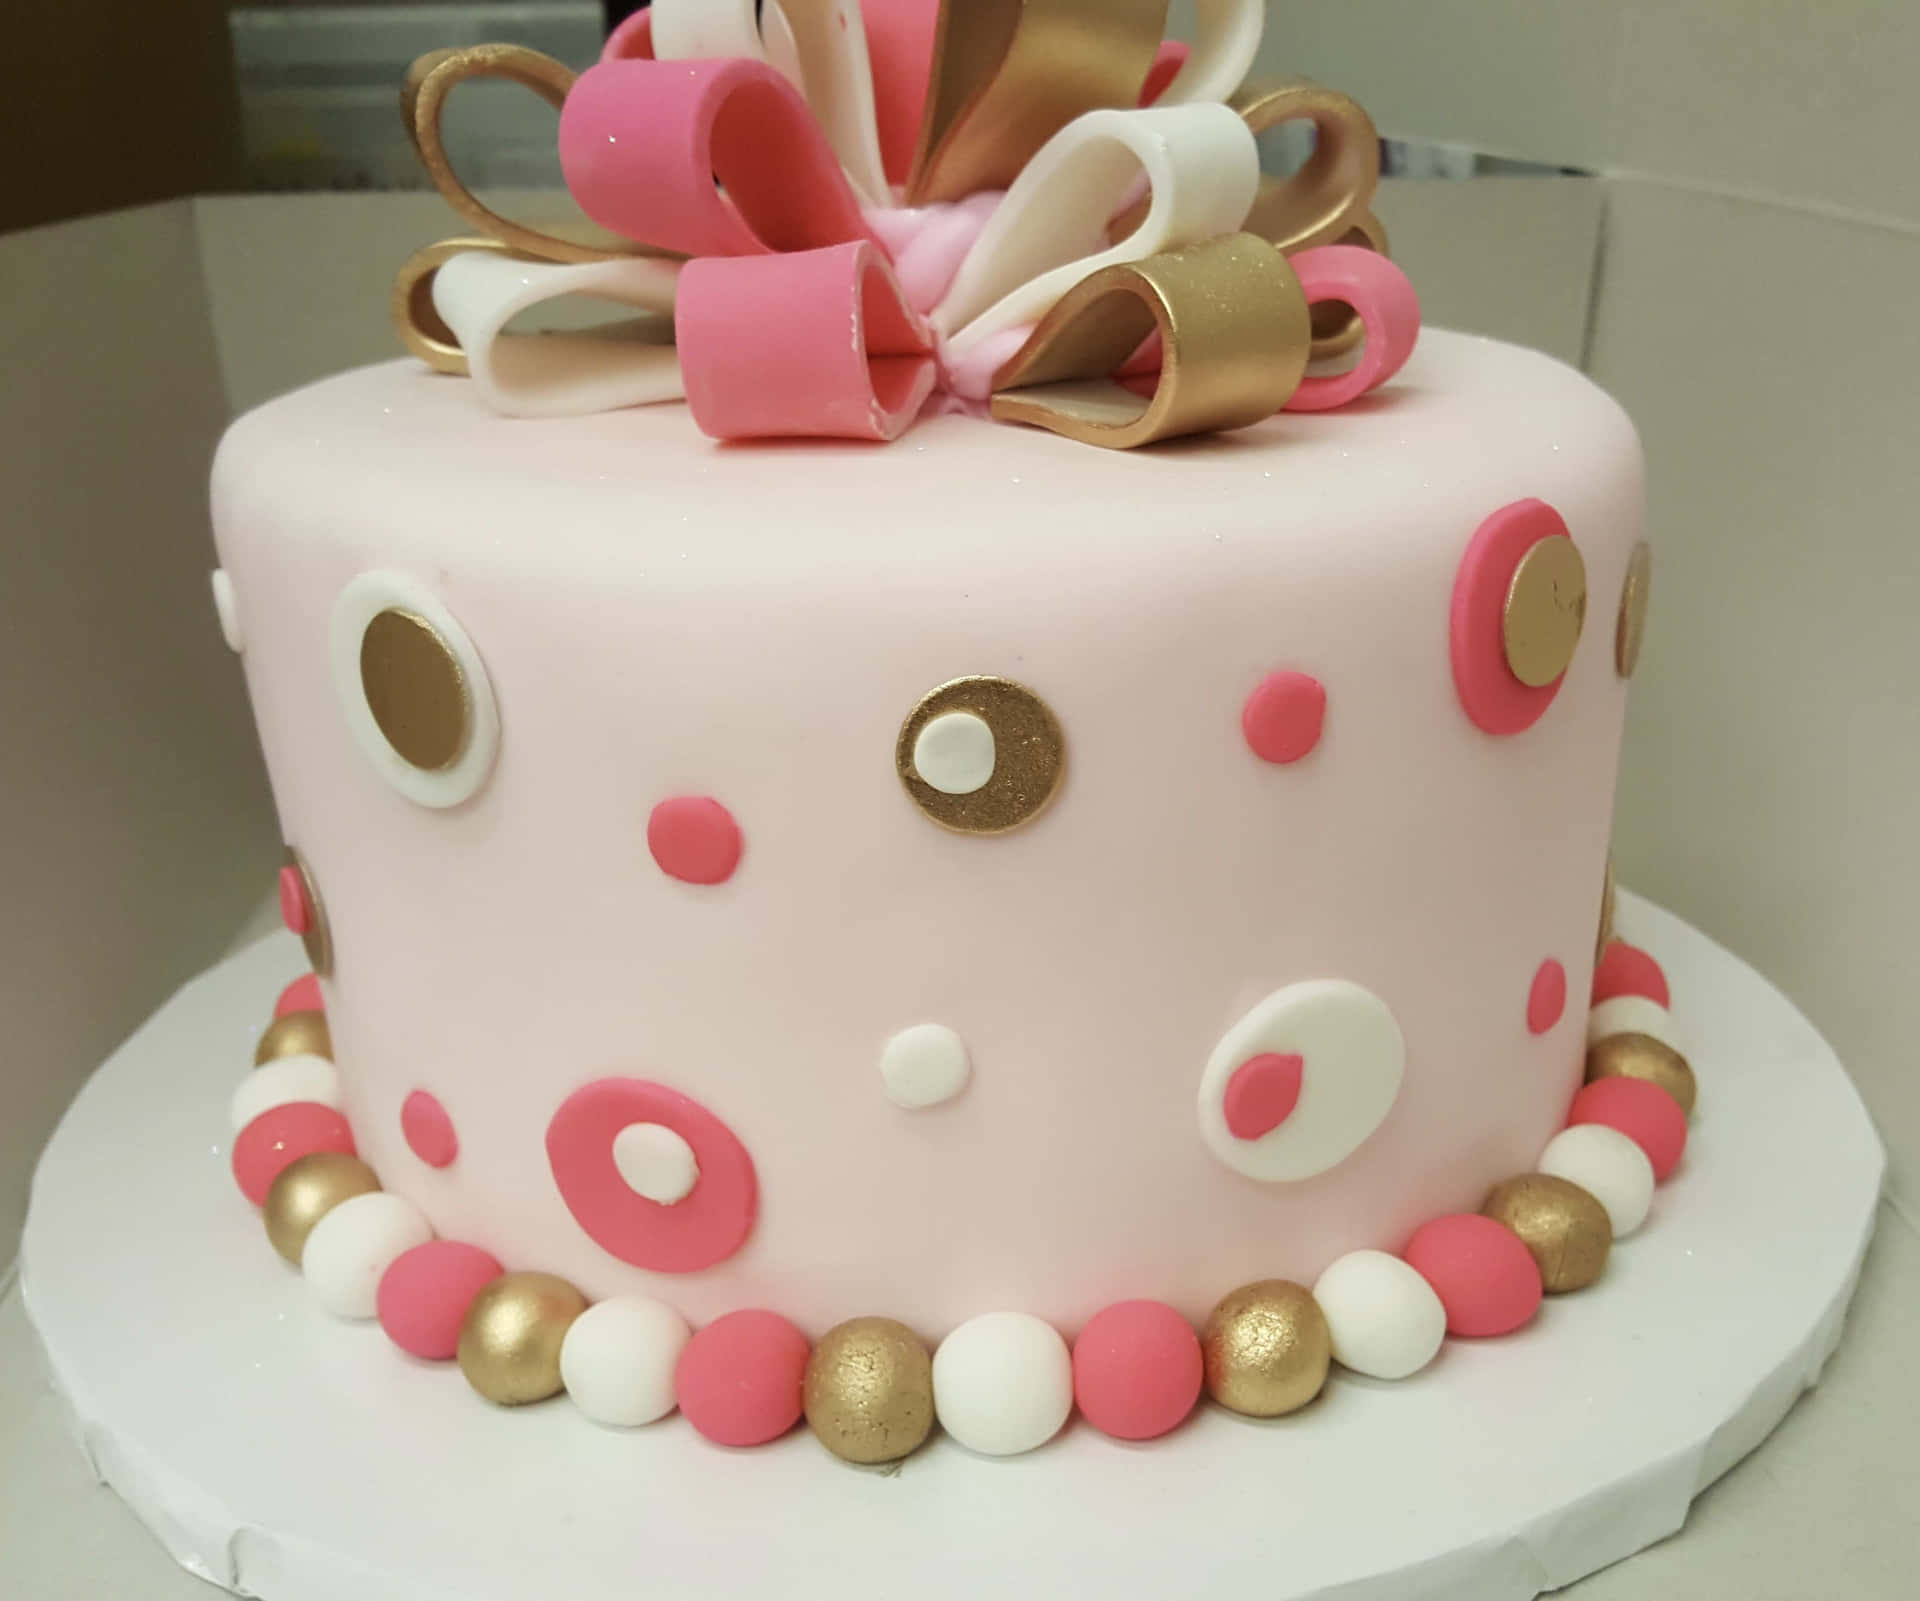 A delicious two-tier cake decorated with fondant, perfect for a special occasion. Wallpaper